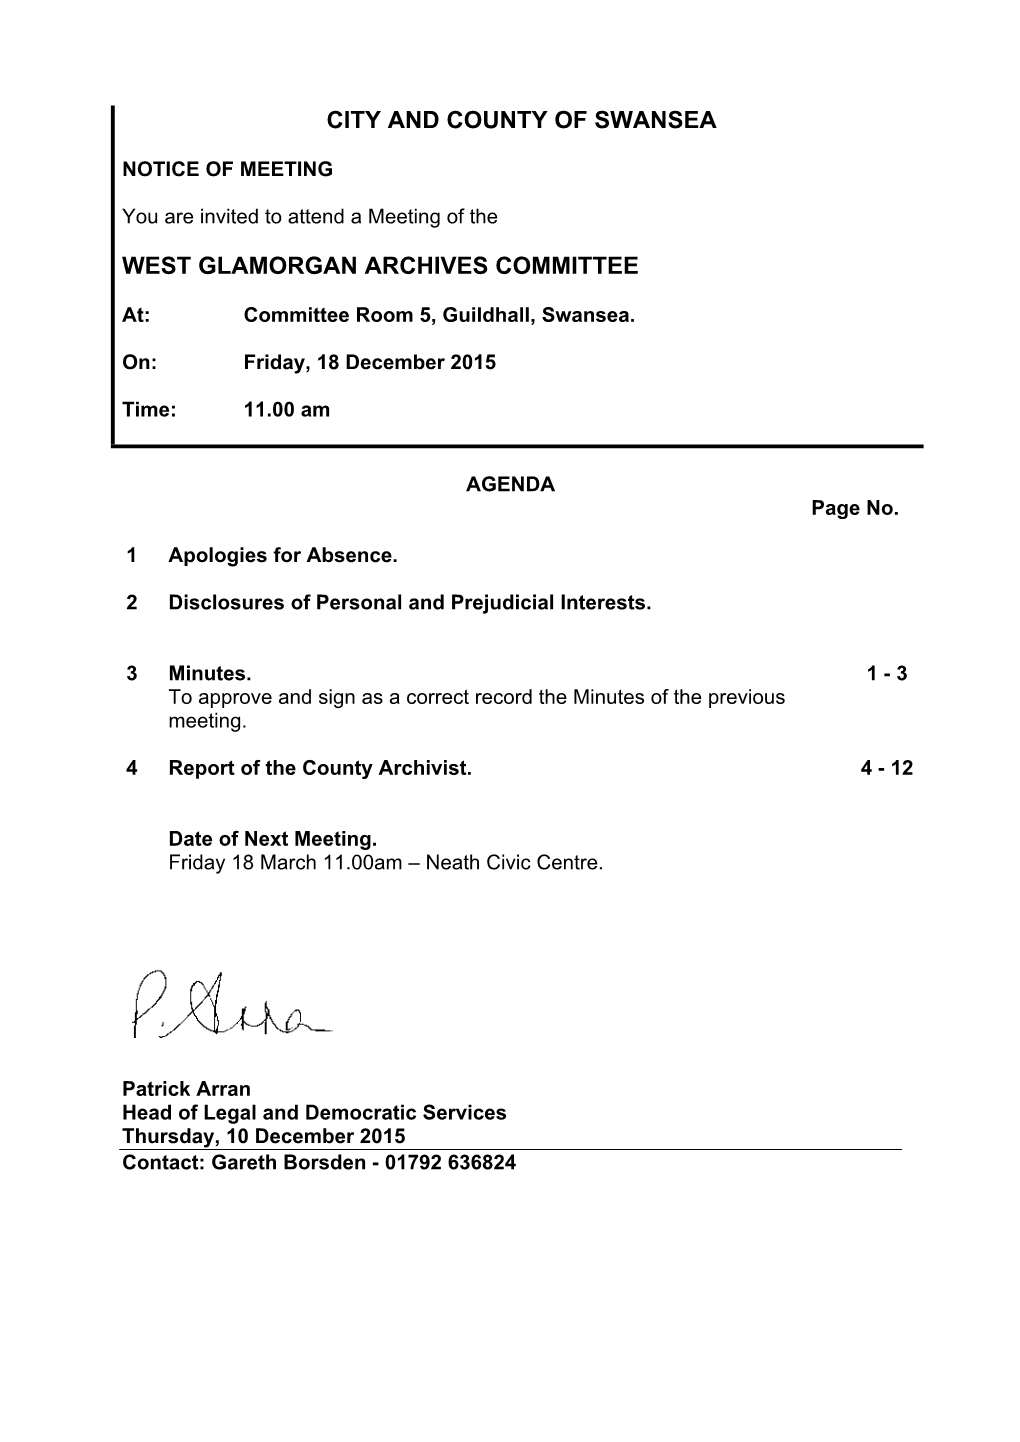 (Public Pack)Agenda Document for West Glamorgan Archives